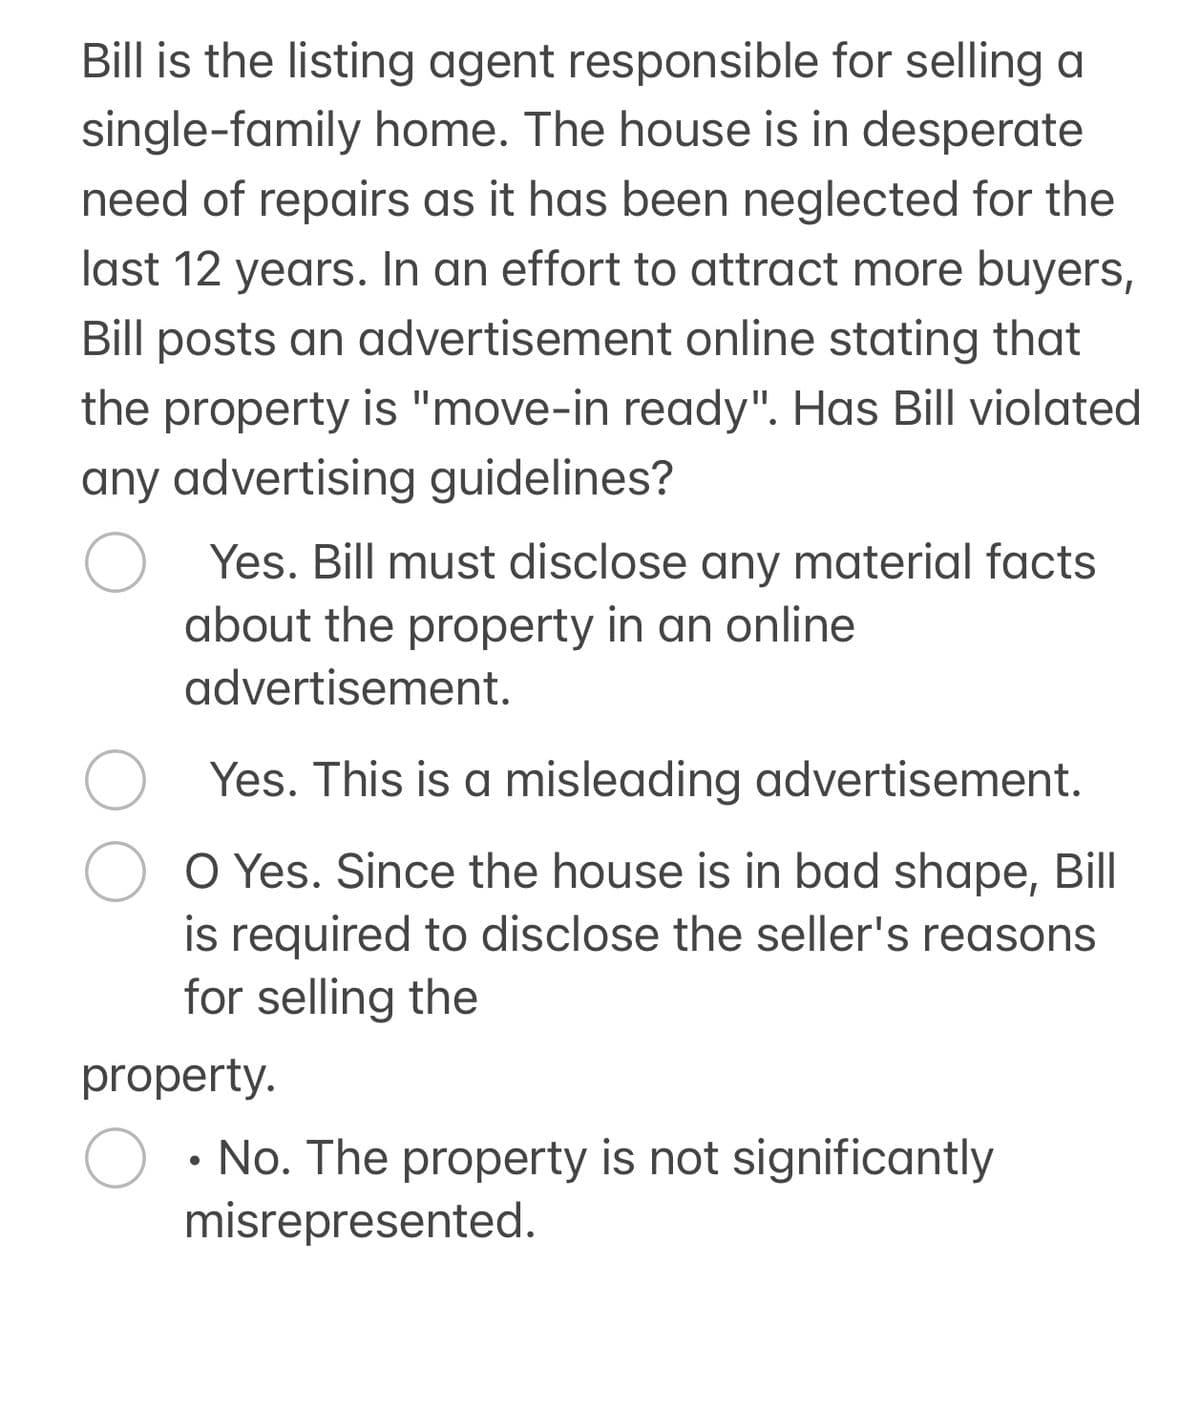 Bill is the listing agent responsible for selling a
single-family home. The house is in desperate
need of repairs as it has been neglected for the
last 12 years. In an effort to attract more buyers,
Bill posts an advertisement online stating that
the property is "move-in ready". Has Bill violated
any advertising guidelines?
О Yes. Bill must disclose any material facts
about the property in an online
advertisement.
Yes. This is a misleading advertisement.
O Yes. Since the house is in bad shape, Bill
is required to disclose the seller's reasons
for selling the
property.
О
• No. The property is not significantly
misrepresented.